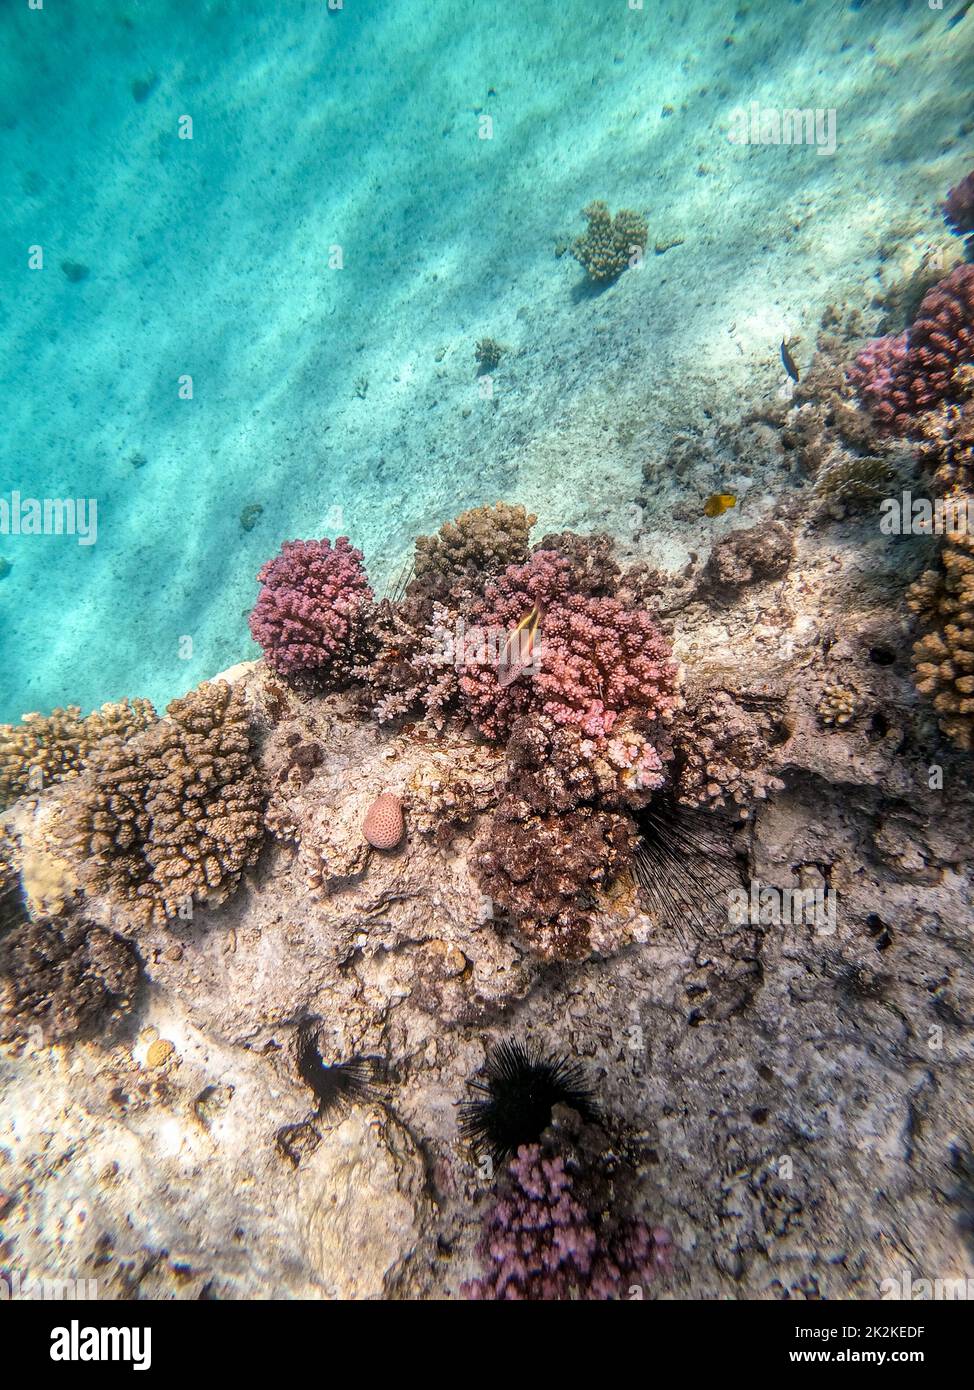 Underwater panoramic view of coral reef with tropical fish, seaweeds ...